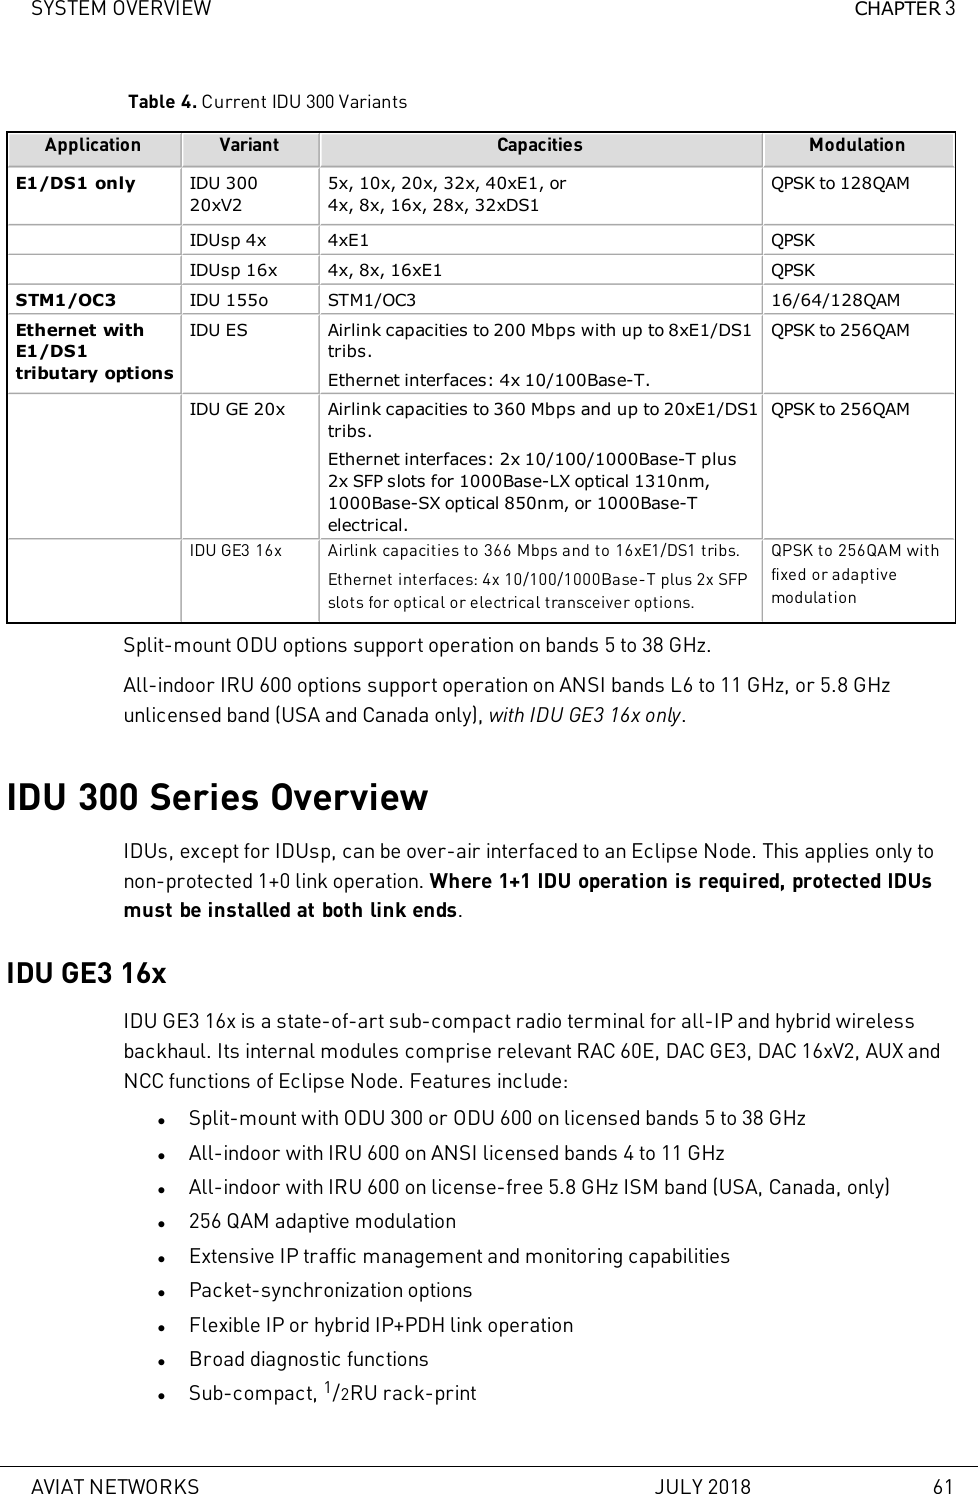 SYSTEM OVERVIEW CHAPTER 3Table 4. Current IDU 300 VariantsApplication Variant Capacities ModulationE1/DS1 only IDU 30020xV25x, 10x, 20x, 32x, 40xE1, or4x, 8x, 16x, 28x, 32xDS1QPSK to 128QAMIDUsp 4x 4xE1 QPSKIDUsp 16x 4x, 8x, 16xE1 QPSKSTM1/OC3 IDU 155o STM1/OC3 16/64/128QAMEthernet withE1/DS1tributary optionsIDU ES Airlink capacities to 200 Mbps with up to 8xE1/DS1tribs.Ethernet interfaces: 4x 10/100Base-T.QPSK to 256QAMIDU GE 20x Airlink capacities to 360 Mbps and up to 20xE1/DS1tribs.Ethernet interfaces: 2x 10/100/1000Base-T plus2x SFP slots for 1000Base-LX optical 1310nm,1000Base-SX optical 850nm, or 1000Base-Telectrical.QPSK to 256QAMIDU GE3 16x Airlink capacities to 366 Mbps and to 16xE1/DS1 tribs.Ethernet interfaces: 4x 10/100/1000Base-T plus 2x SFPslots for optical or electrical transceiver options.QPSK to 256QAM withfixed or adaptivemodulationSplit-mount ODU options support operation on bands 5 to 38 GHz.All-indoor IRU 600 options support operation on ANSI bands L6 to 11 GHz, or 5.8 GHzunlicensed band (USA and Canada only), with IDU GE3 16x only.IDU 300 Series OverviewIDUs, except for IDUsp, can be over-air interfaced to an Eclipse Node. This applies only tonon-protected 1+0 link operation. Where 1+1 IDU operation is required, protected IDUsmust be installed at both link ends.IDU GE3 16xIDU GE3 16x is a state-of-art sub-compact radio terminal for all-IP and hybrid wirelessbackhaul. Its internal modules comprise relevant RAC 60E, DAC GE3, DAC 16xV2, AUX andNCC functions of Eclipse Node. Features include:lSplit-mount with ODU 300 or ODU 600 on licensed bands 5 to 38 GHzlAll-indoor with IRU 600 on ANSI licensed bands 4 to 11 GHzlAll-indoor with IRU 600 on license-free 5.8 GHz ISM band (USA, Canada, only)l256 QAM adaptive modulationlExtensive IP traffic management and monitoring capabilitieslPacket-synchronization optionslFlexible IP or hybrid IP+PDH link operationlBroad diagnostic functionslSub-compact, 1/2RU rack-printAVIAT NETWORKS JULY 2018 61